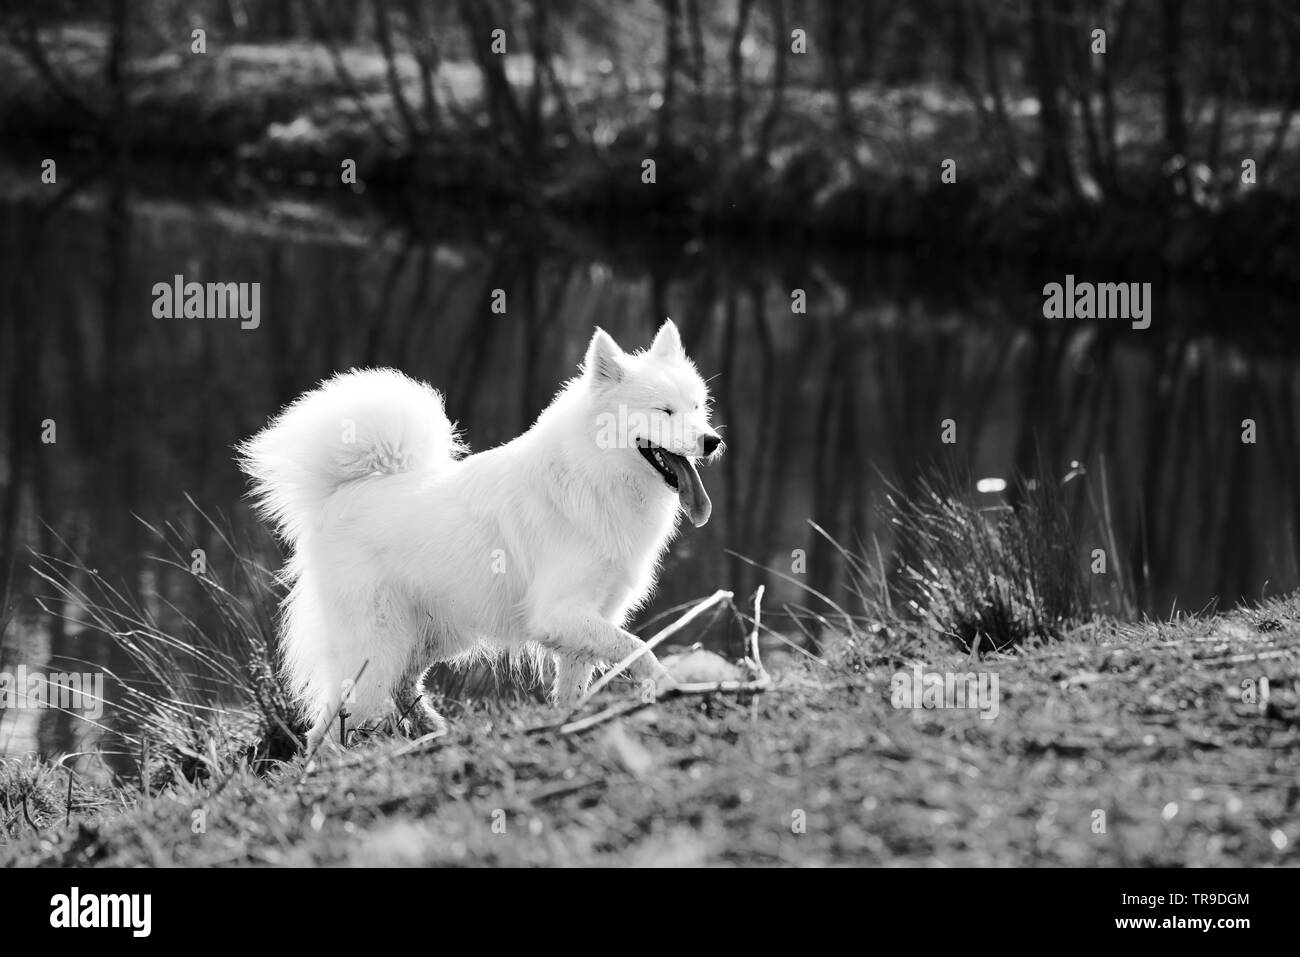 Black And White Photo Of A Cute Fluffy White Samoyed Dog With Her Eyes Closed Near A Pond At The Dog Park Stock Photo Alamy